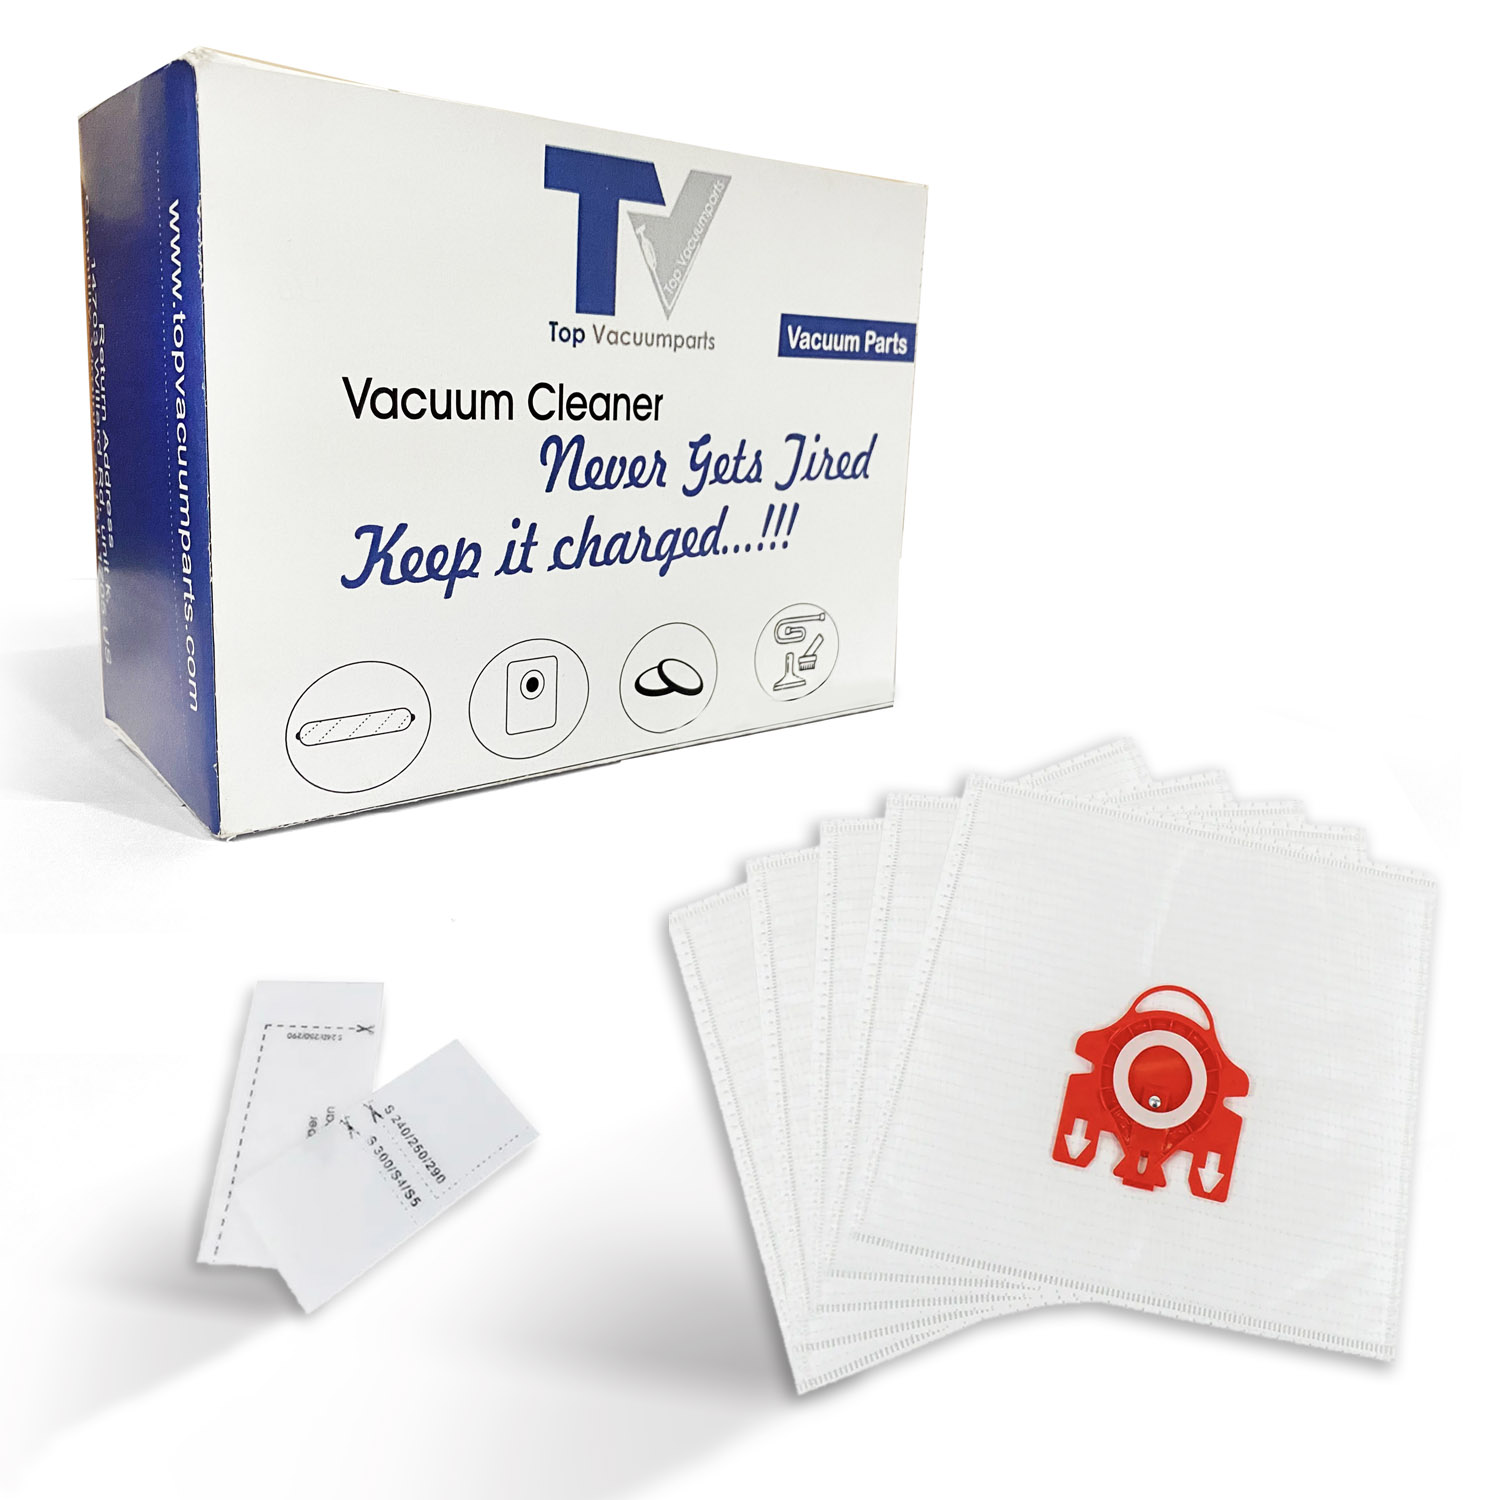 Miele Genuine GN Vacuum Cleaner Bags C3 Buy Online Or at Vac City Shop